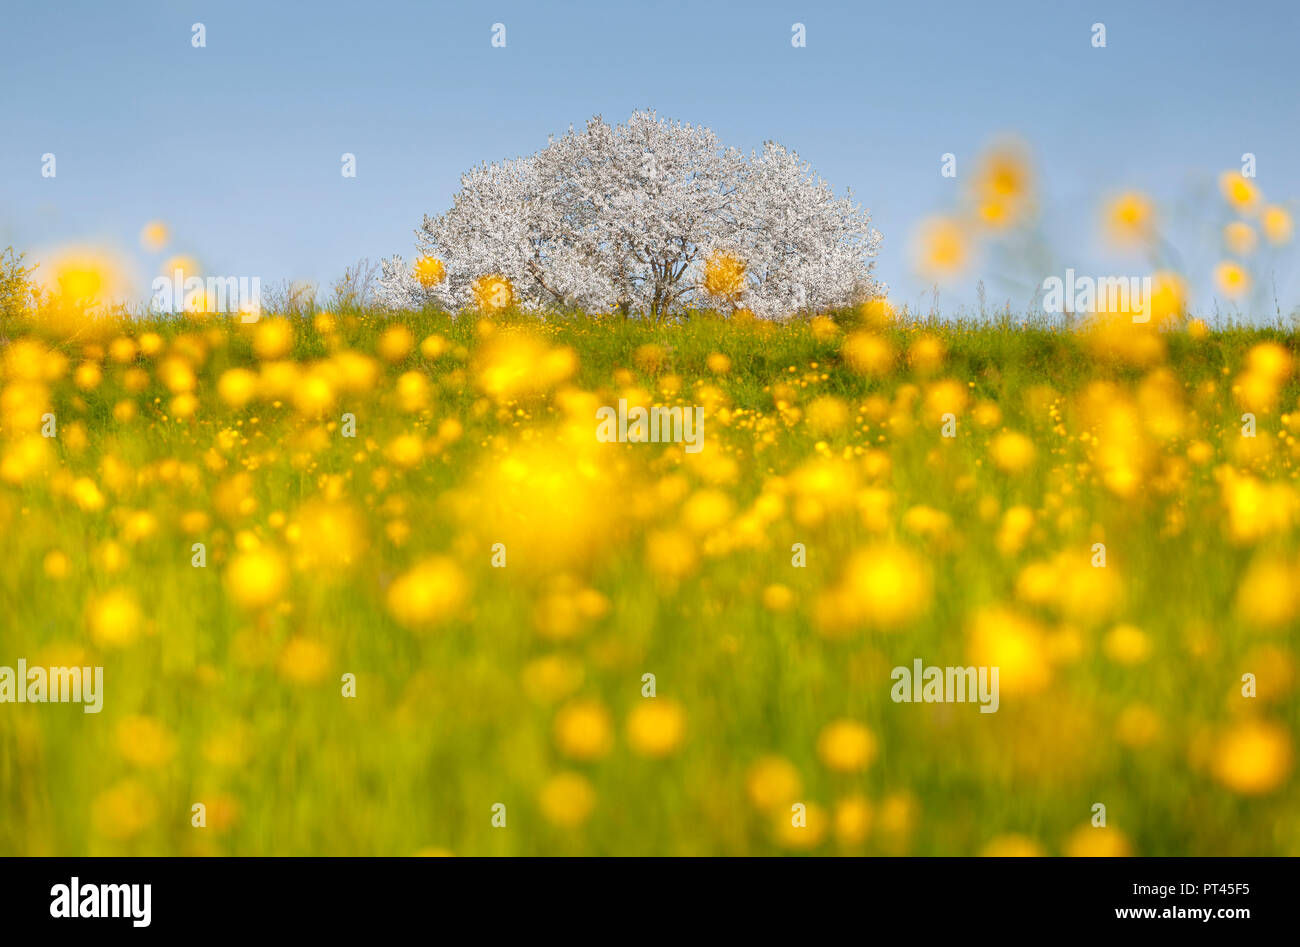 Buttercups (Ranunculus) flowers frame the most biggest cherry tree in Italy in a spring time, Vergo Zoccorino, Besana in Brianza, Monza and Brianza province, Lombardy, Italy, Europe Stock Photo